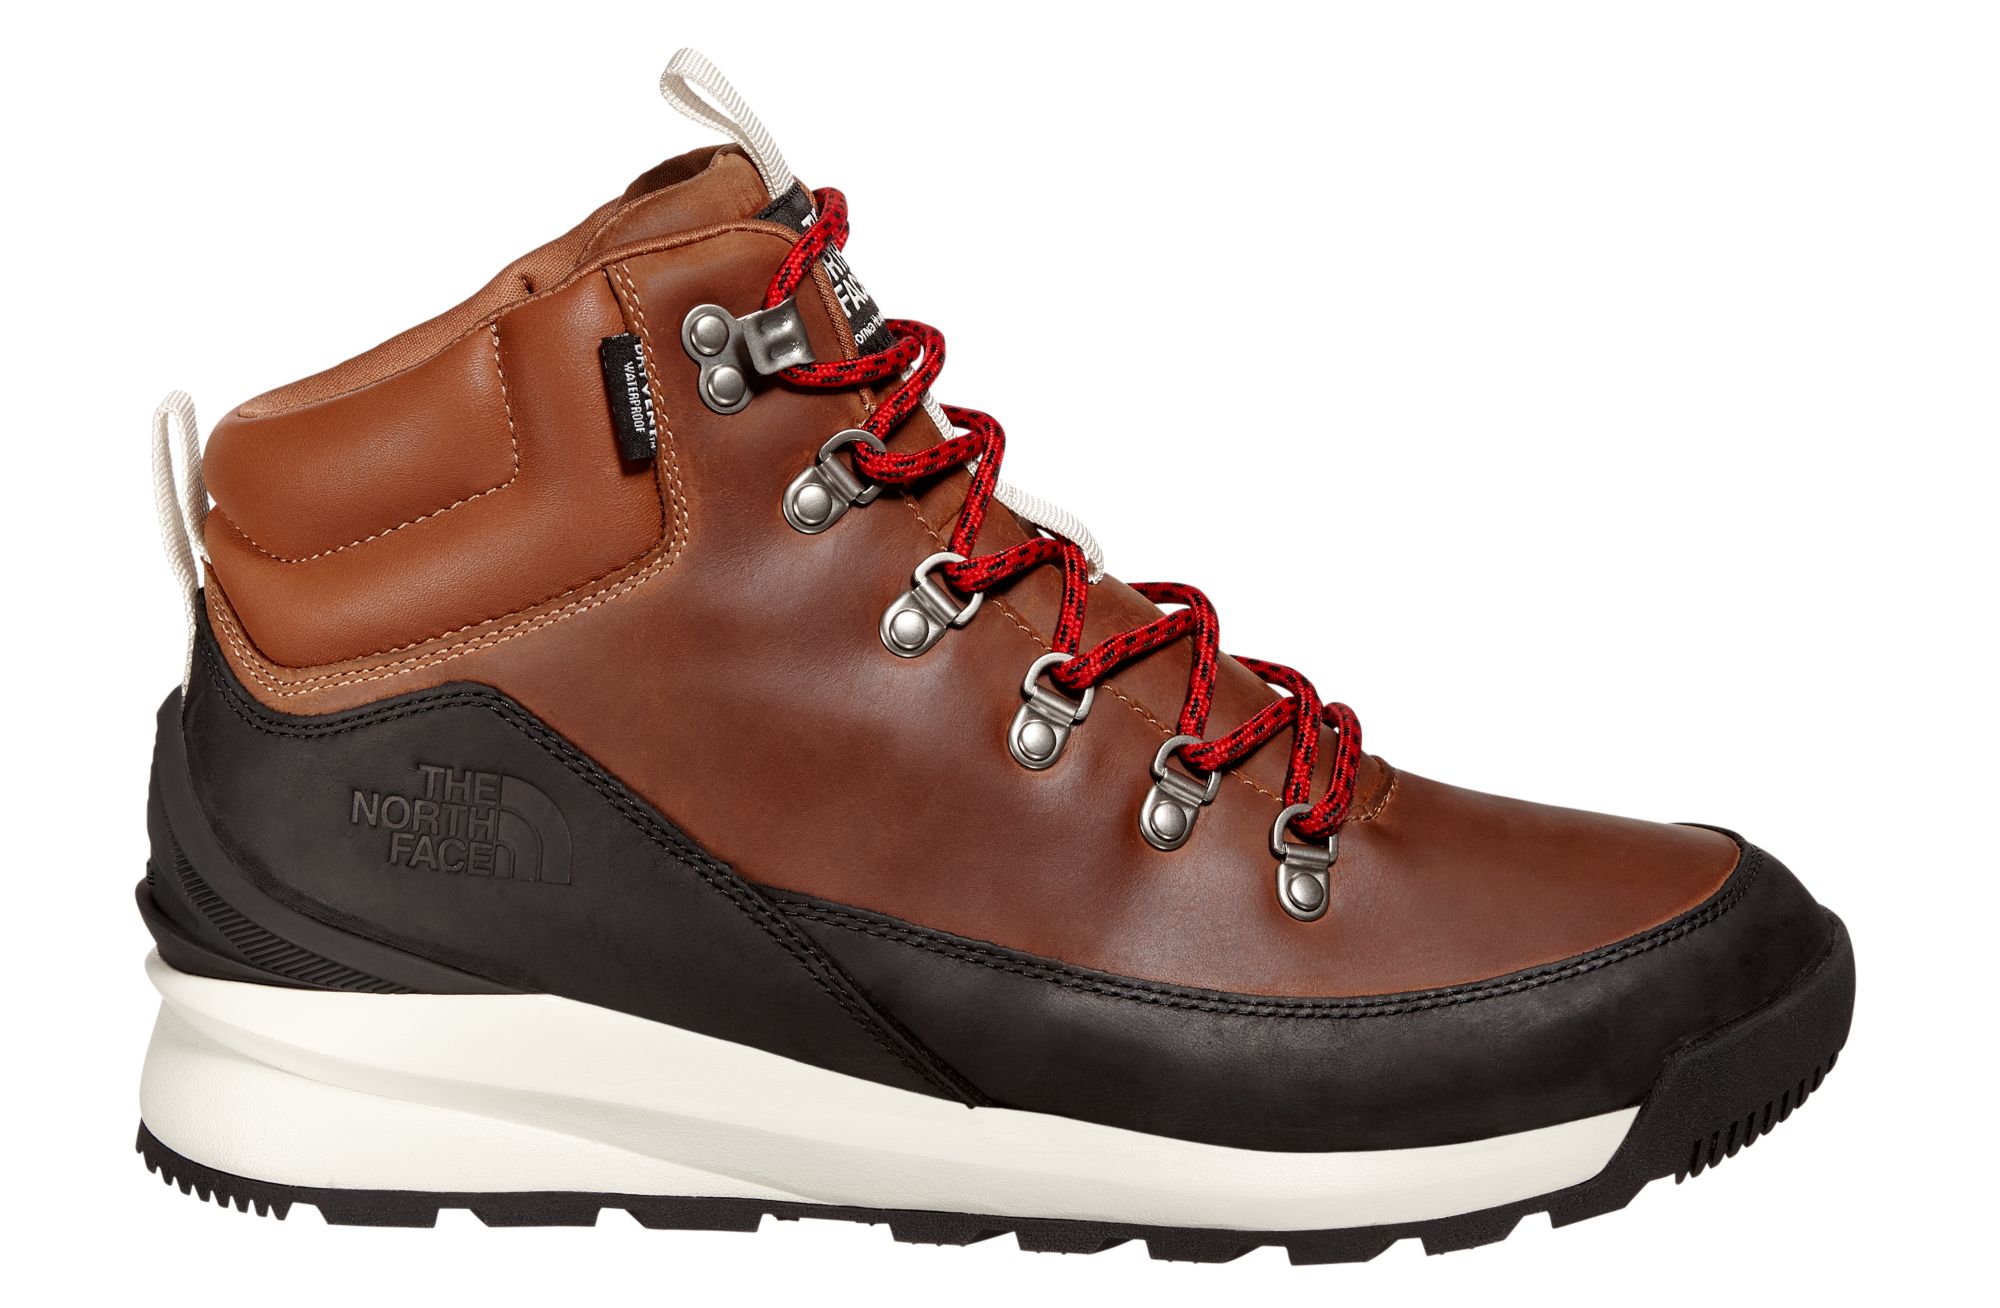 pacific mountain berkeley mid hiking boots